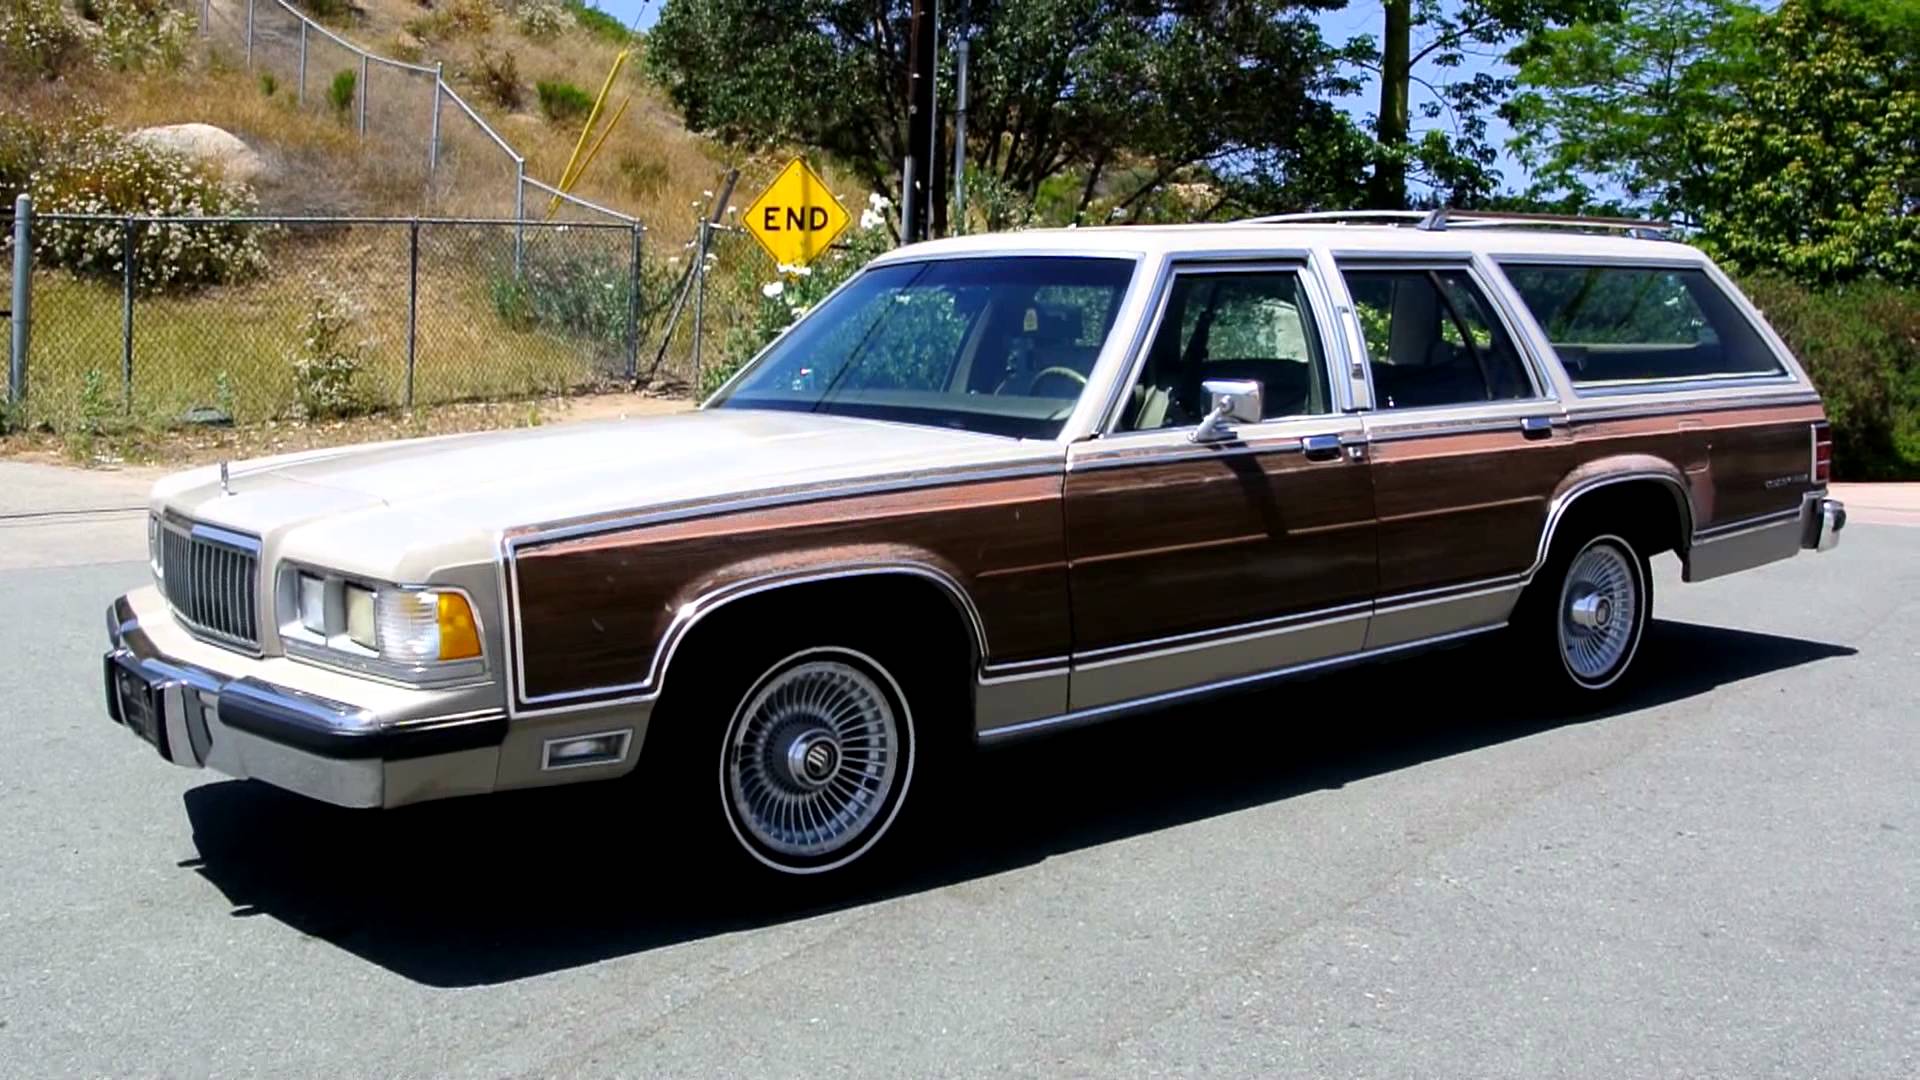 Ford Grand Marquis 1983